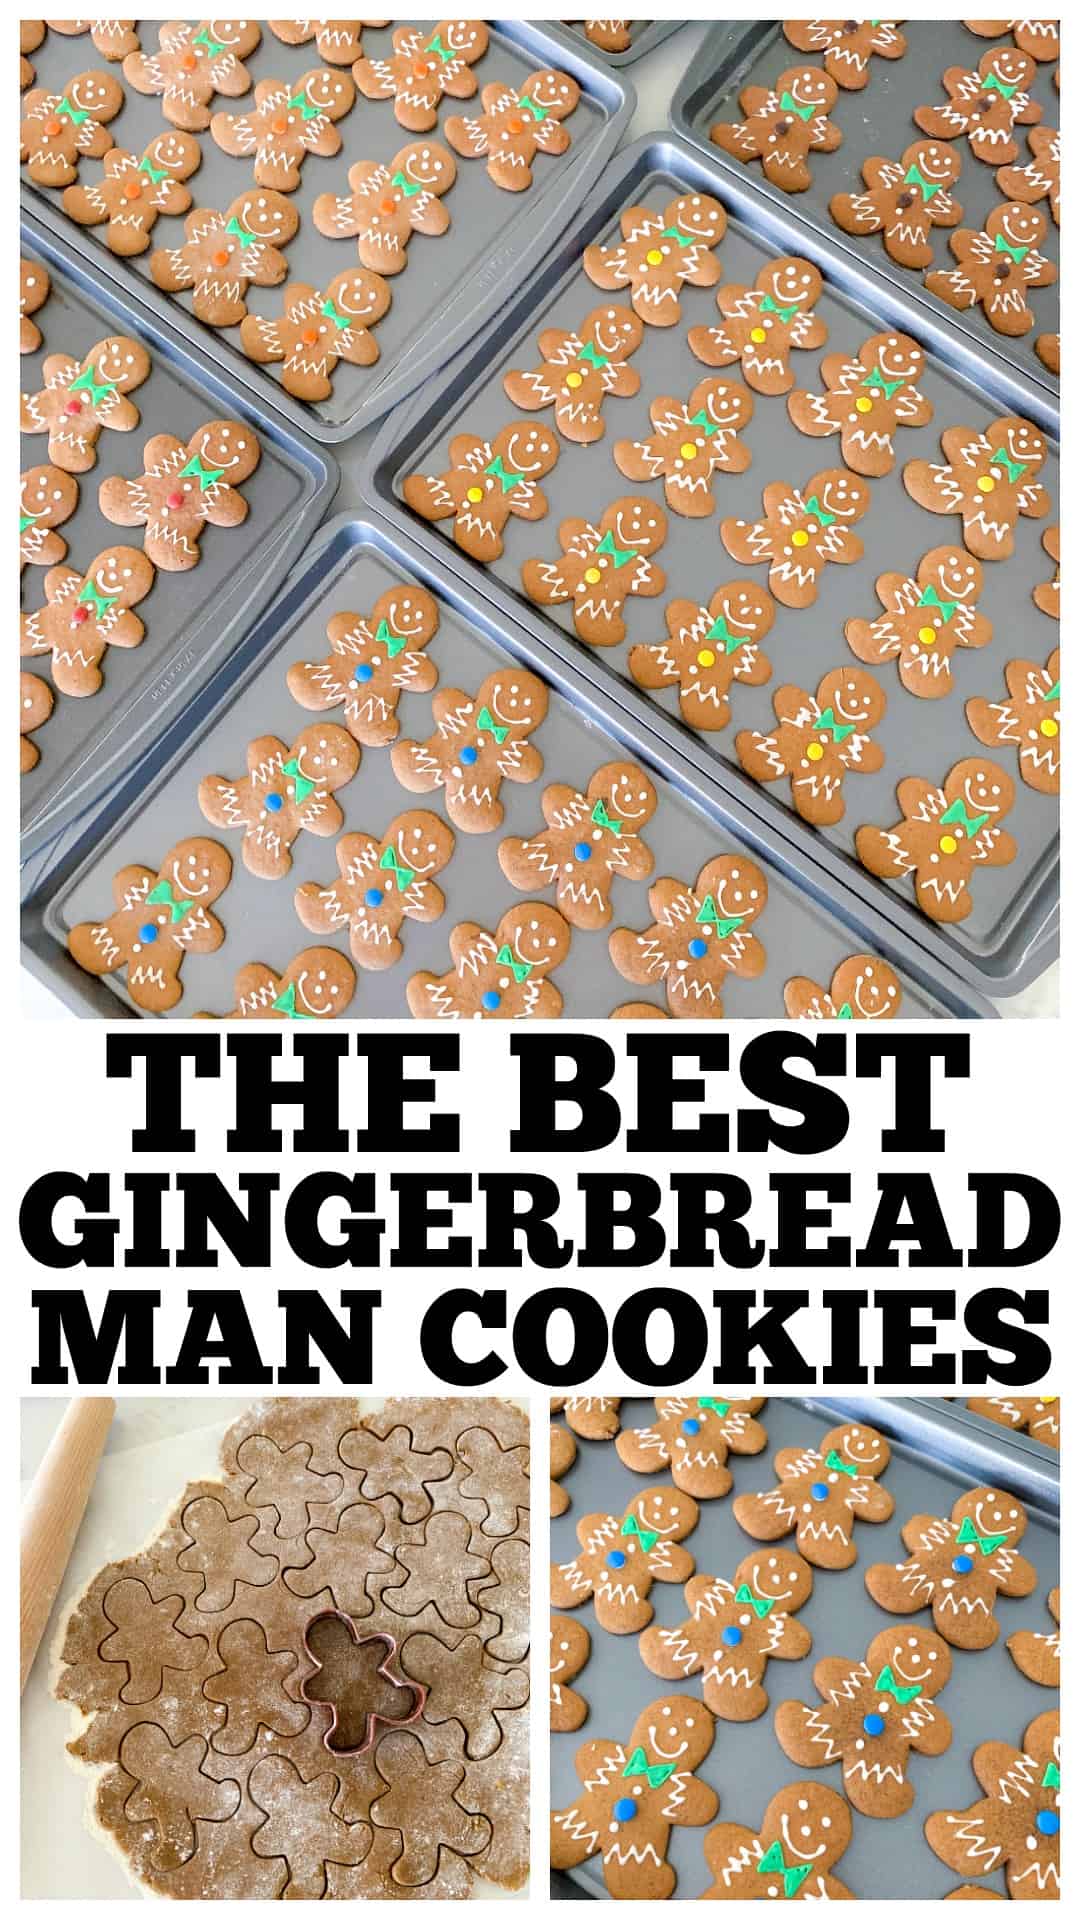 photo collage of gingerbread man cookies